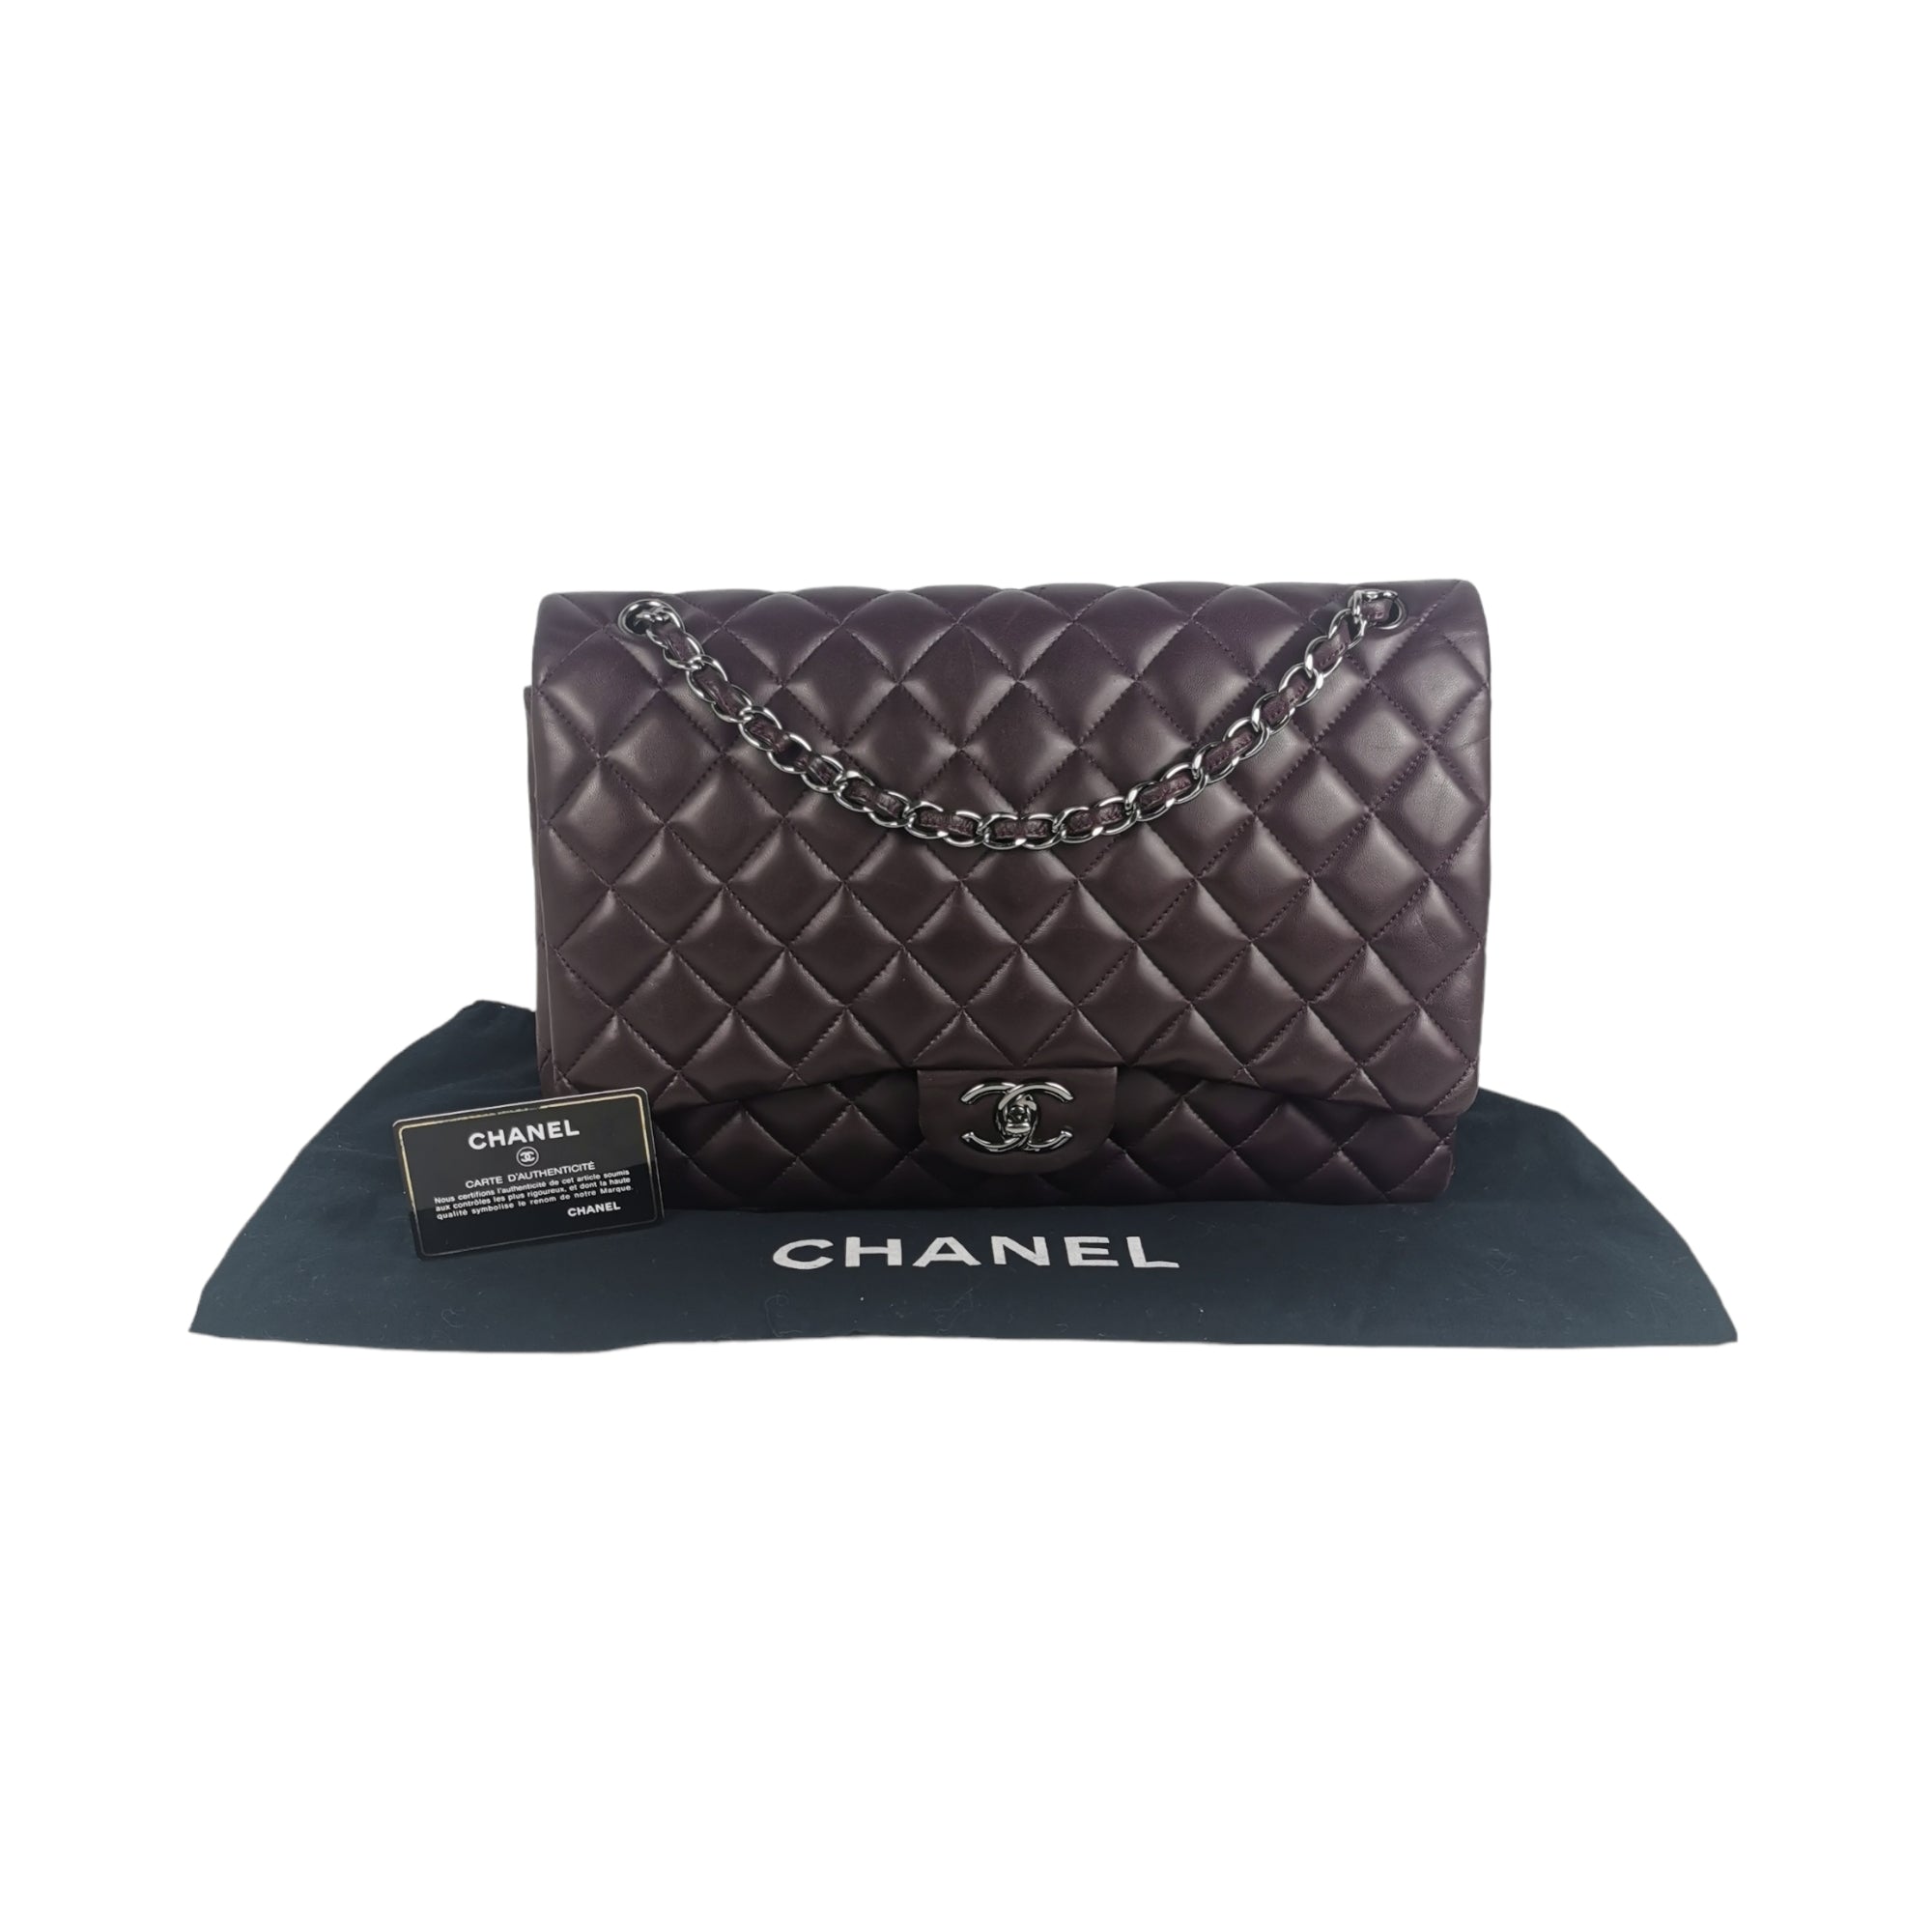 Timeless/classique leather handbag Chanel Black in Leather - 27623364